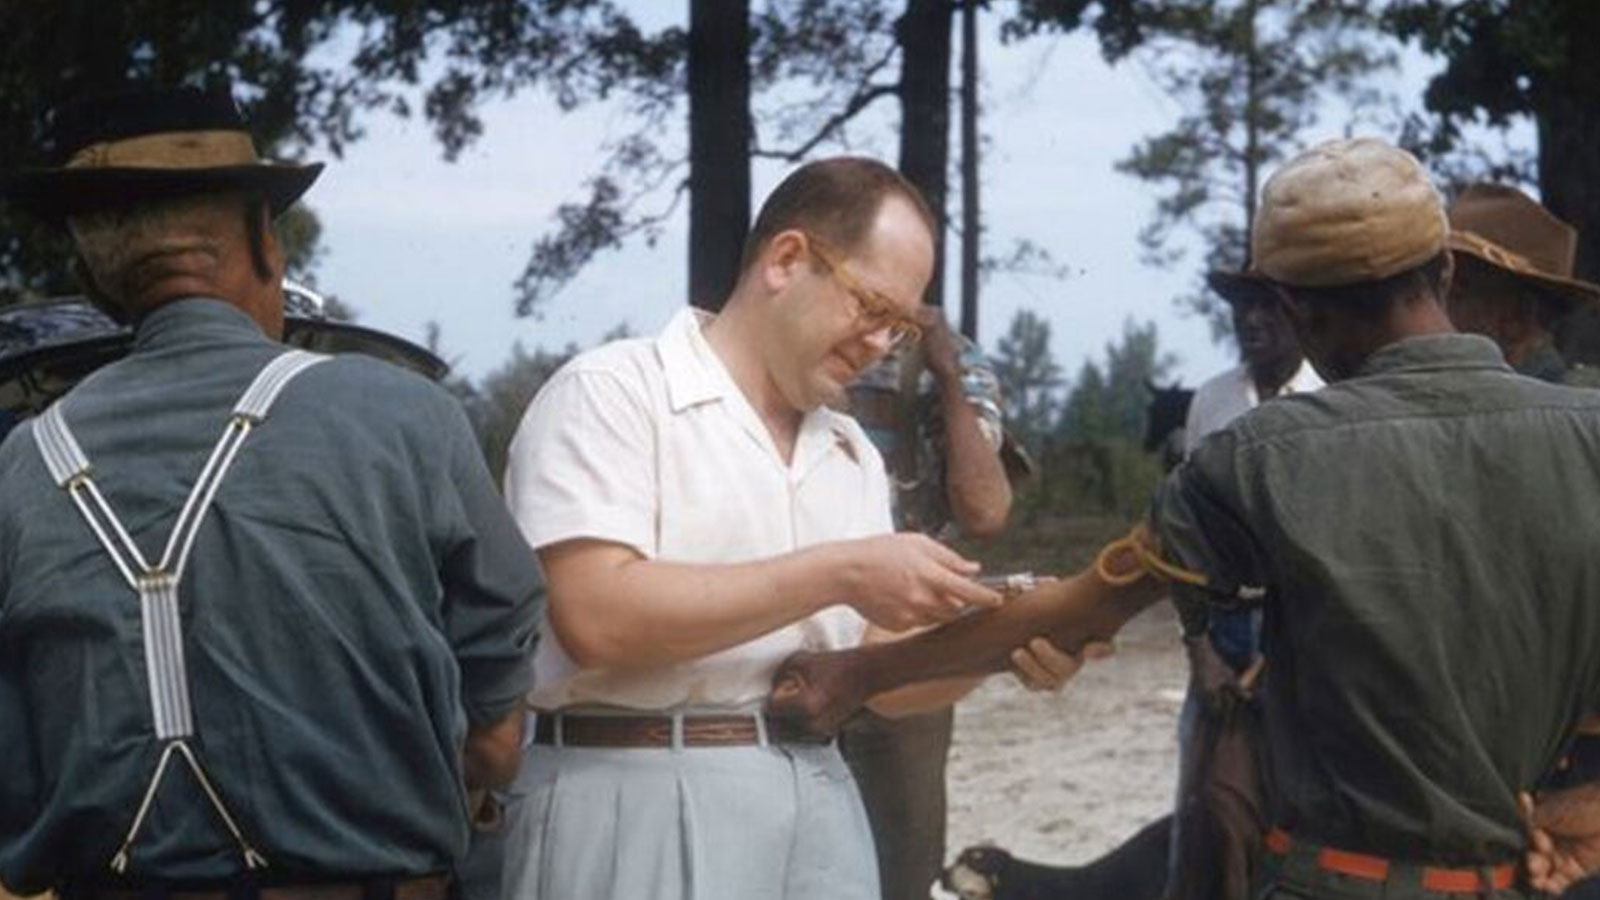 Participants in the Tuskegee syphilis experiments.